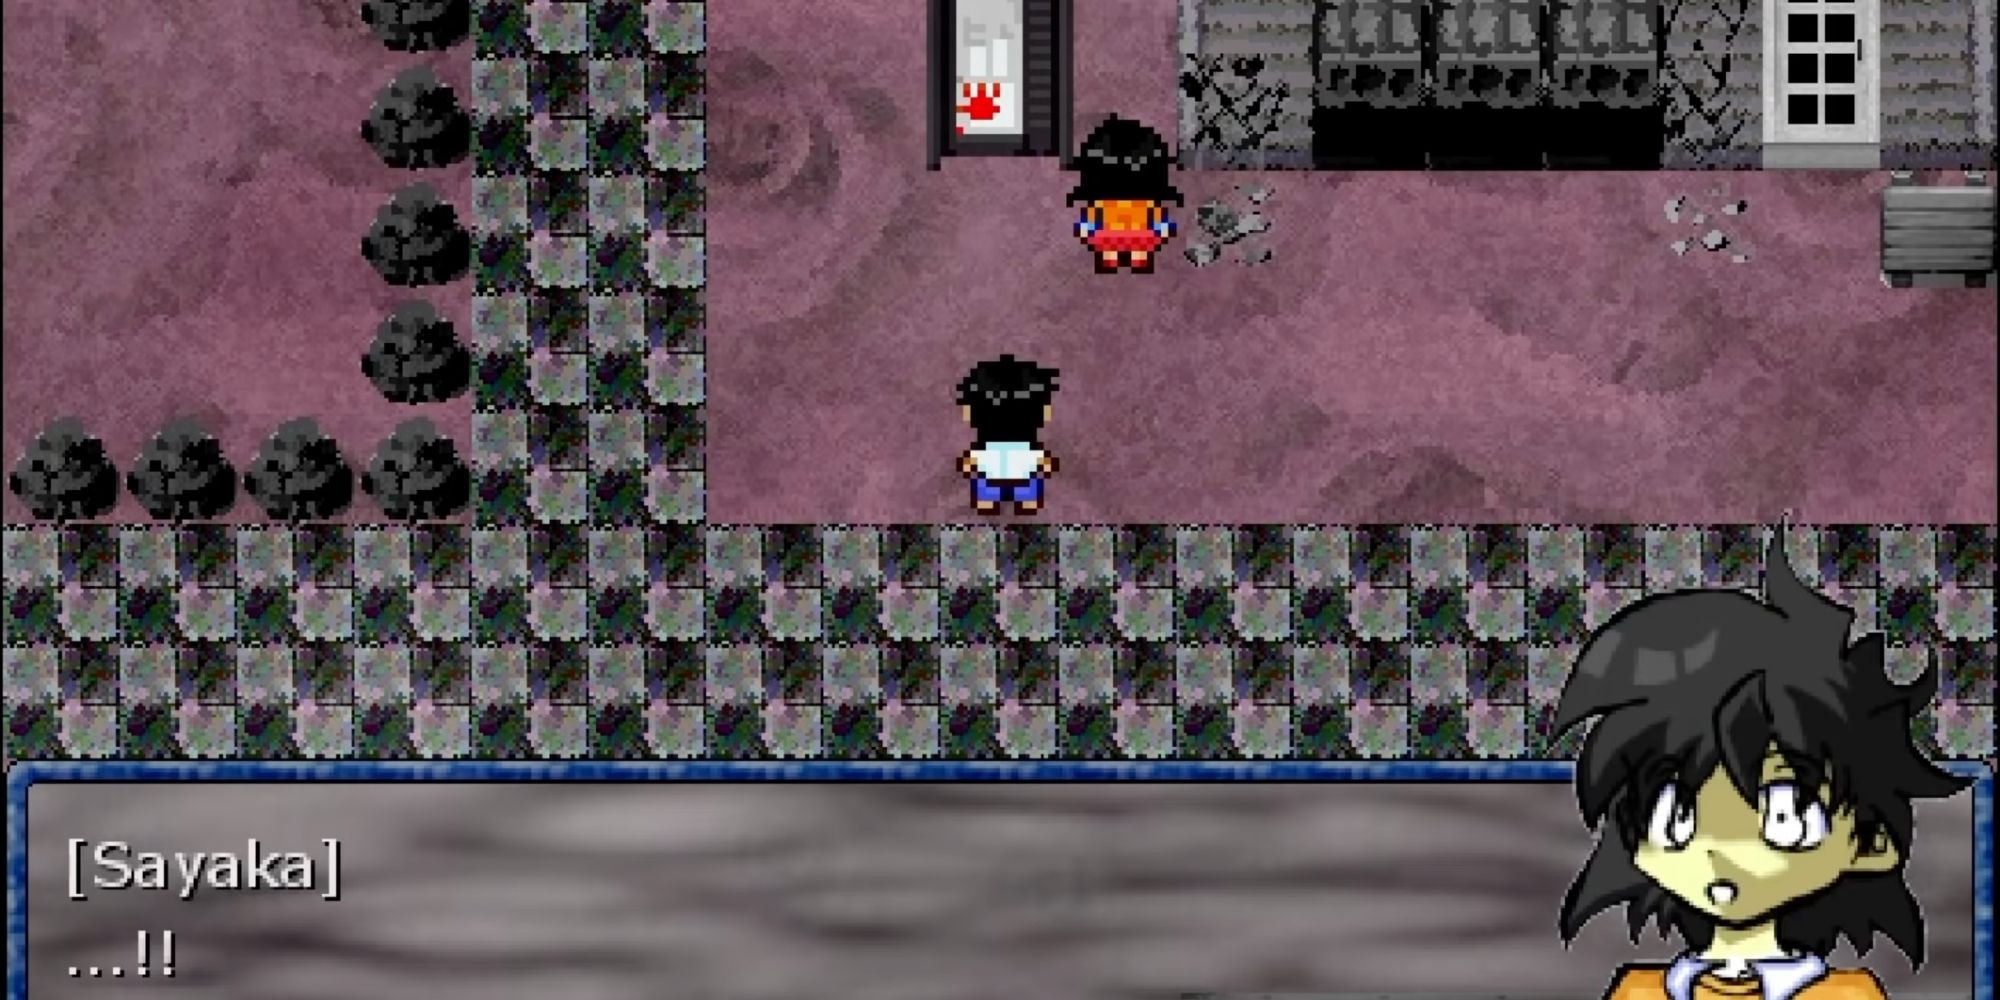 A screenshot of Re:Kinder, showing a girl named Sayaka reacting in shock to a bloody handprint on a vending machine